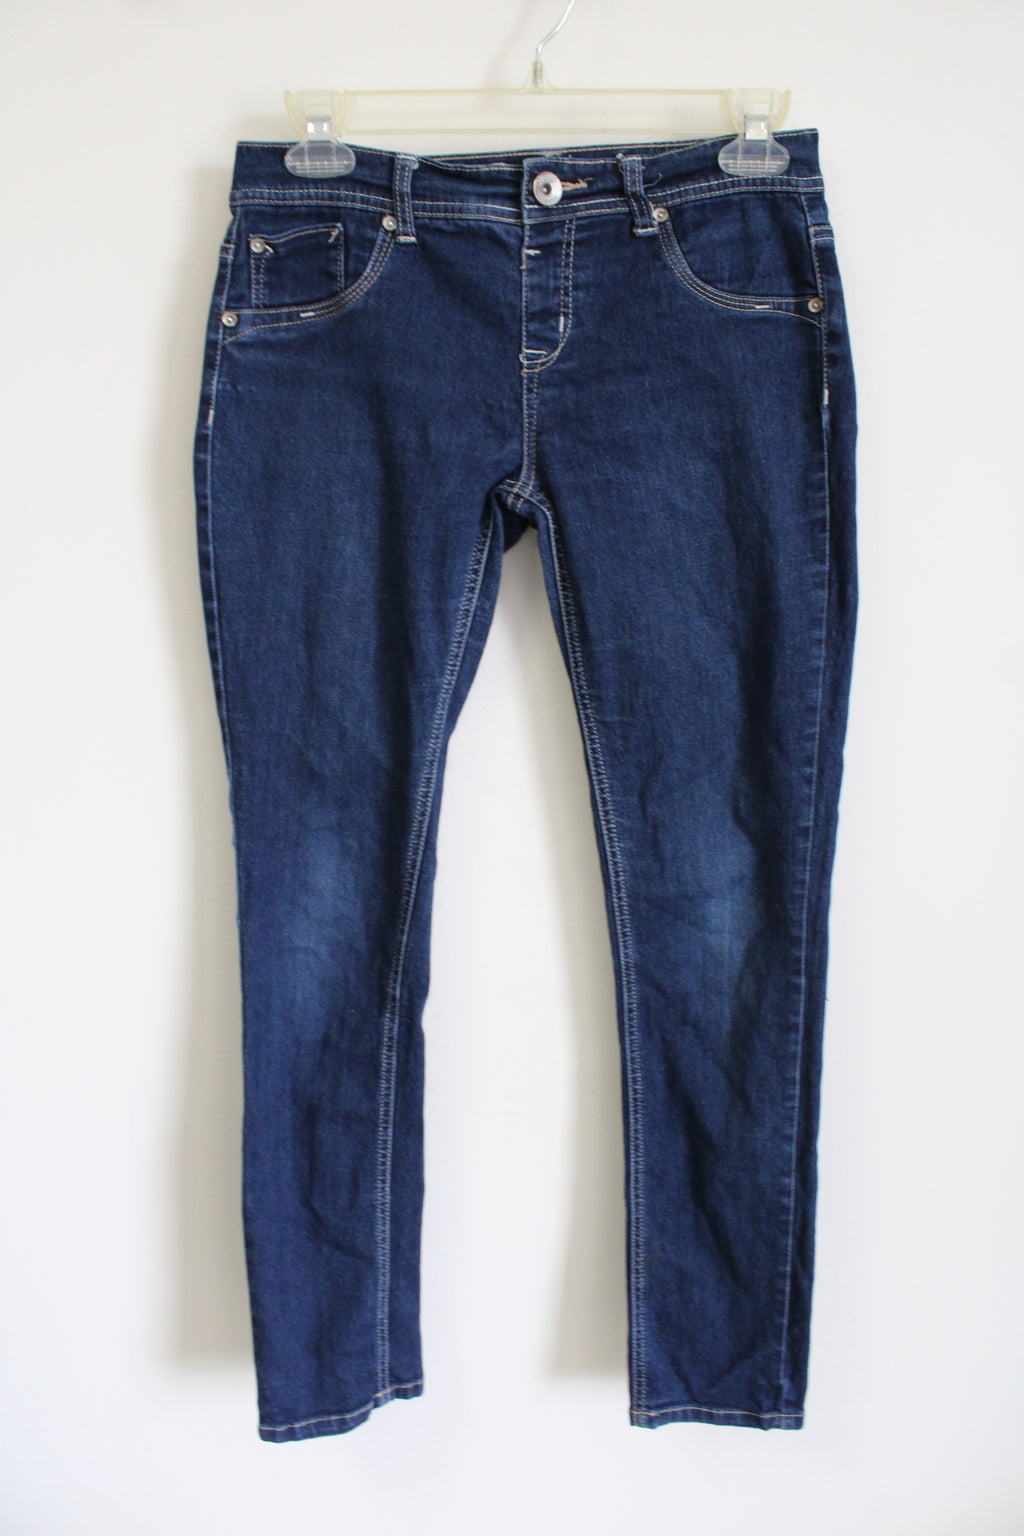 Justice Simply Low Jeggings | 14 1/2